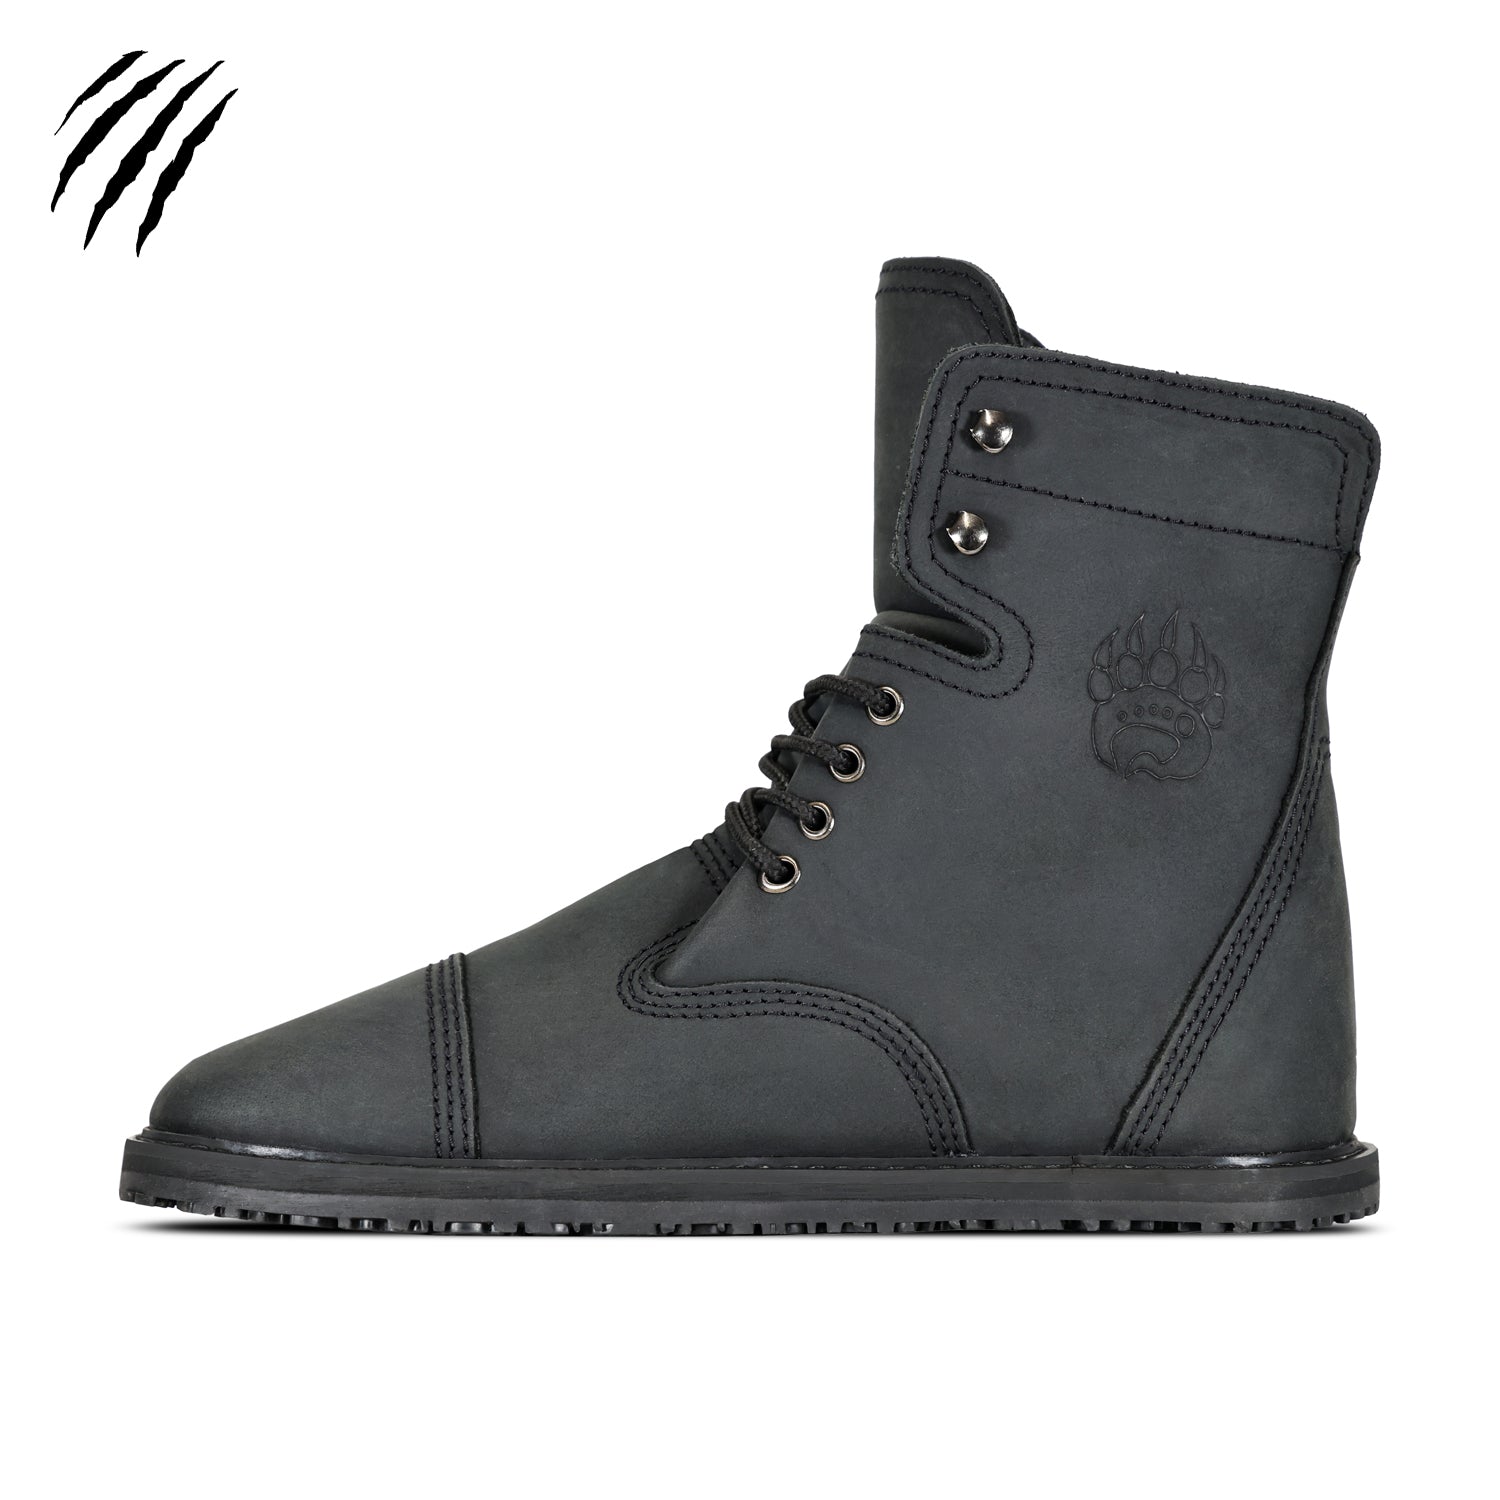 A black, high-top combat boot crafted from high-quality leather with laces and a small logo emblem on the side, displayed against a white background by Bearfoot featuring the Bruin | Black Bear | Blemished design.